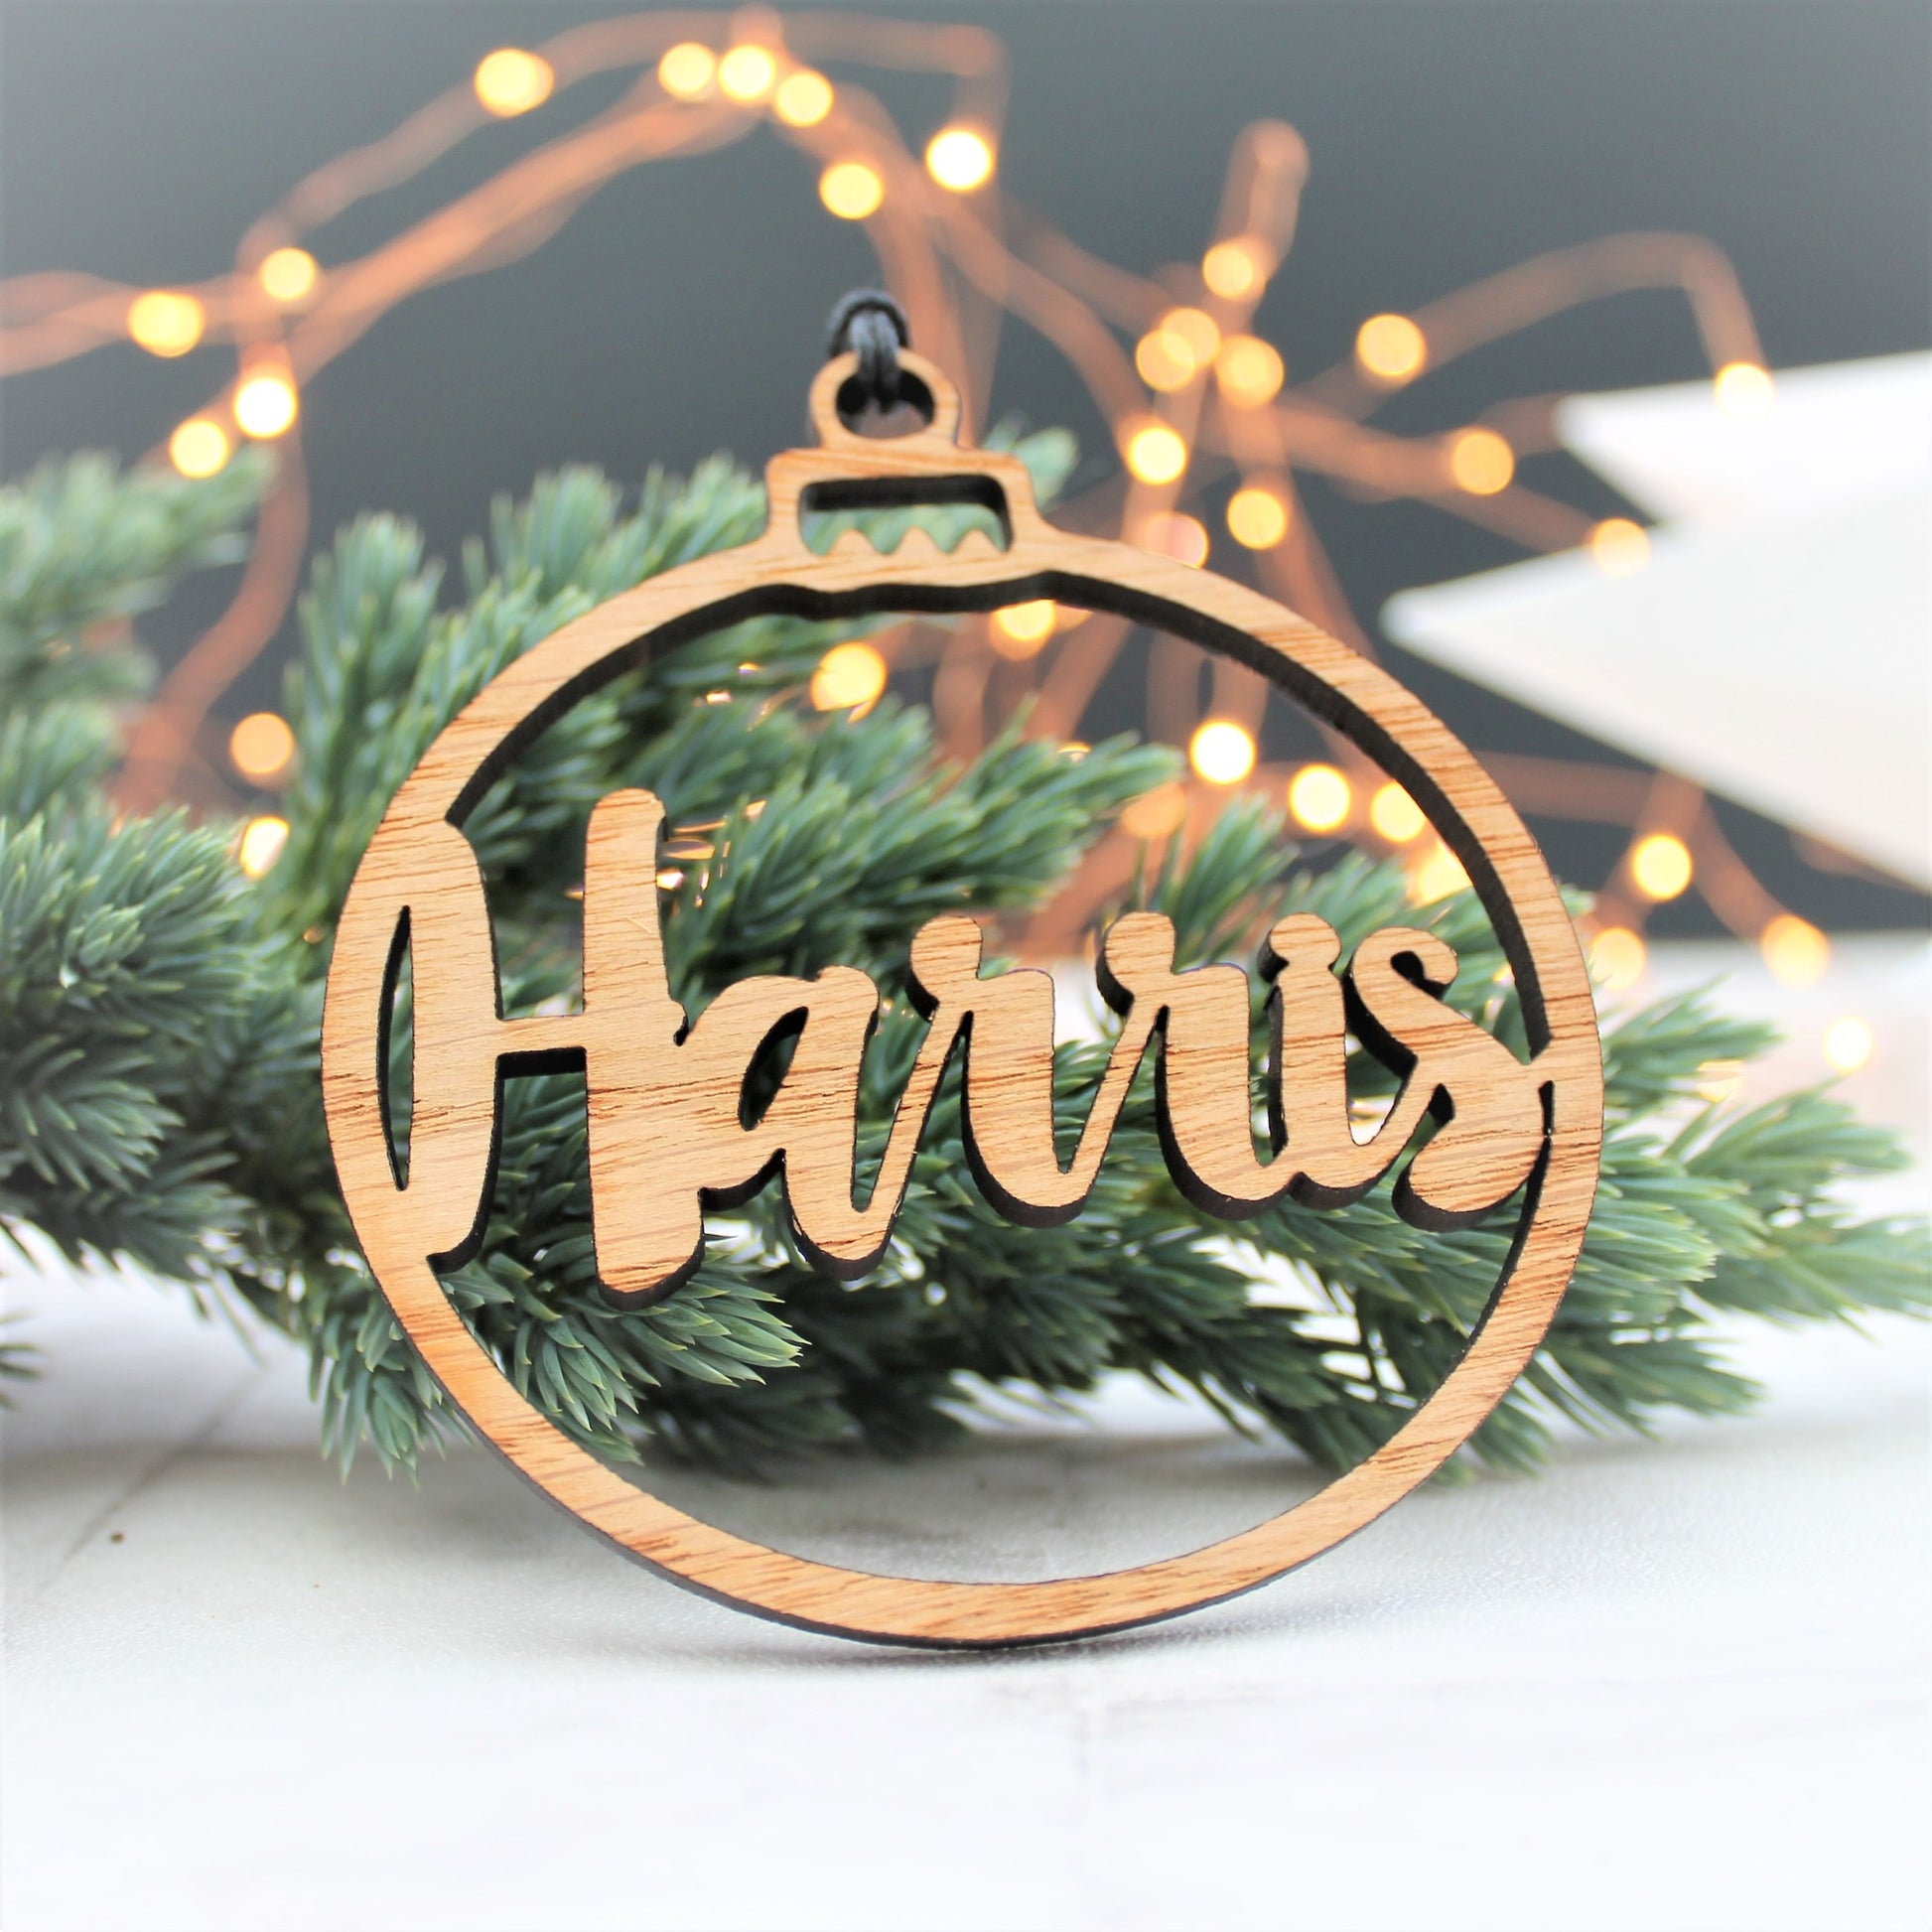 Wooden Christmas Tree Decoration personalised with your very own name or text